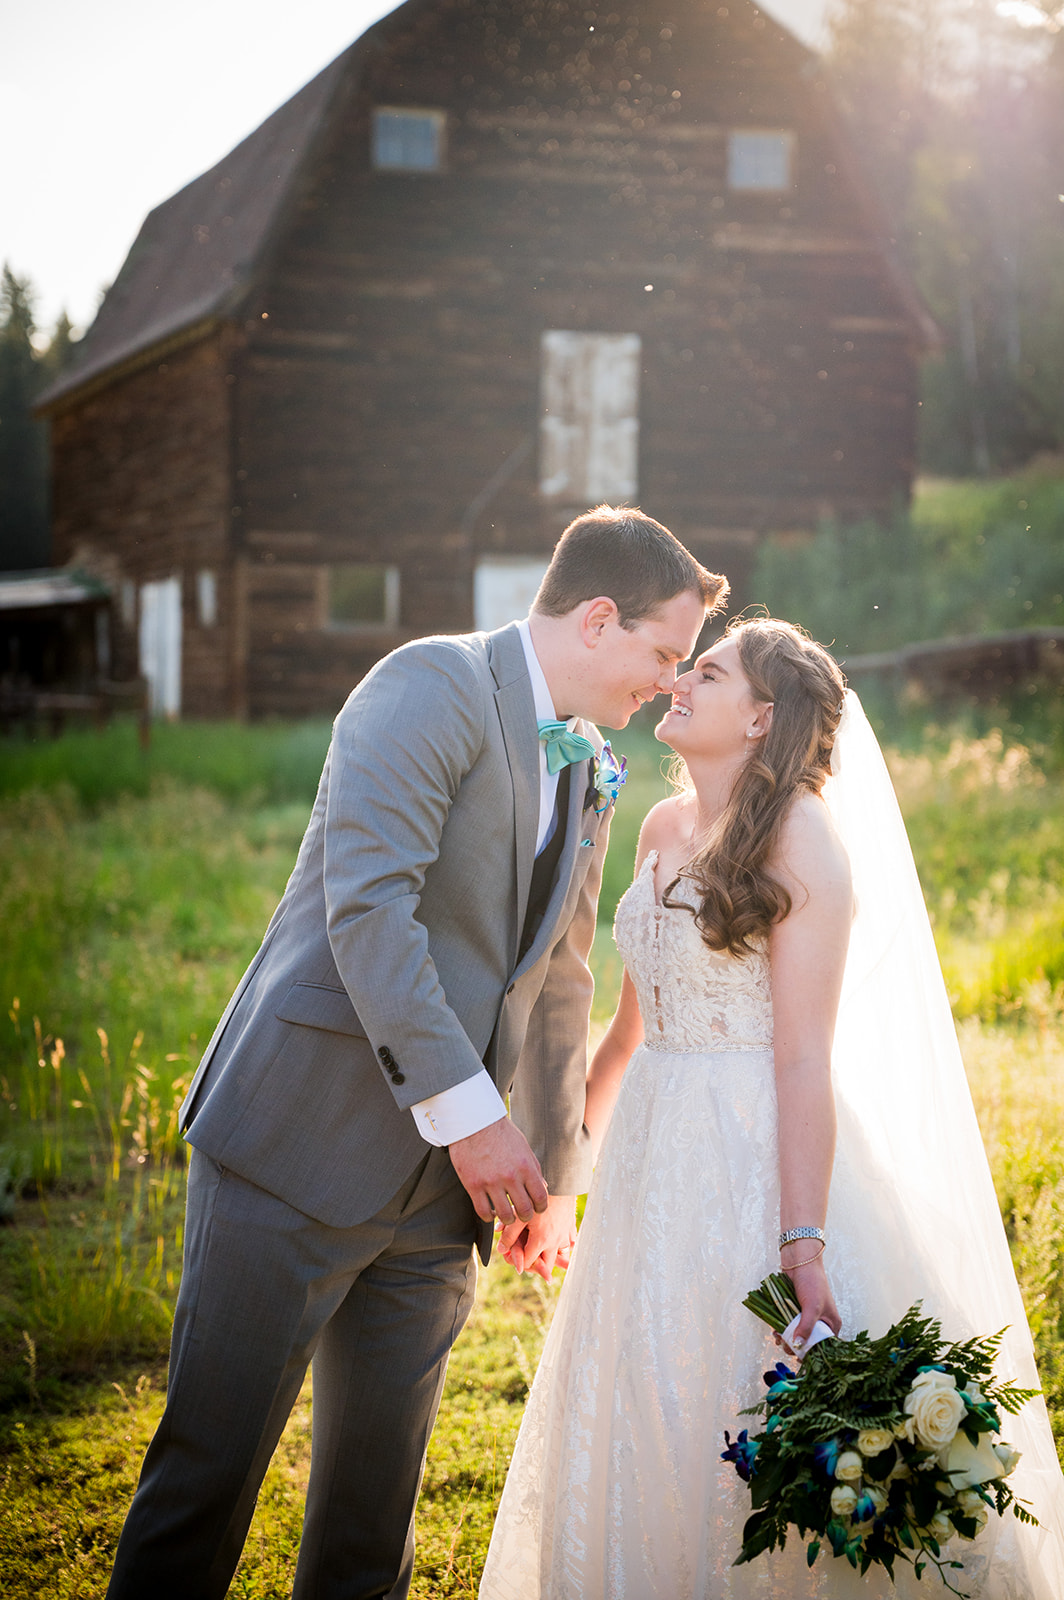 The groom leans in and shares eskimo kisses with the bride as the golden hour sun shines behind them.